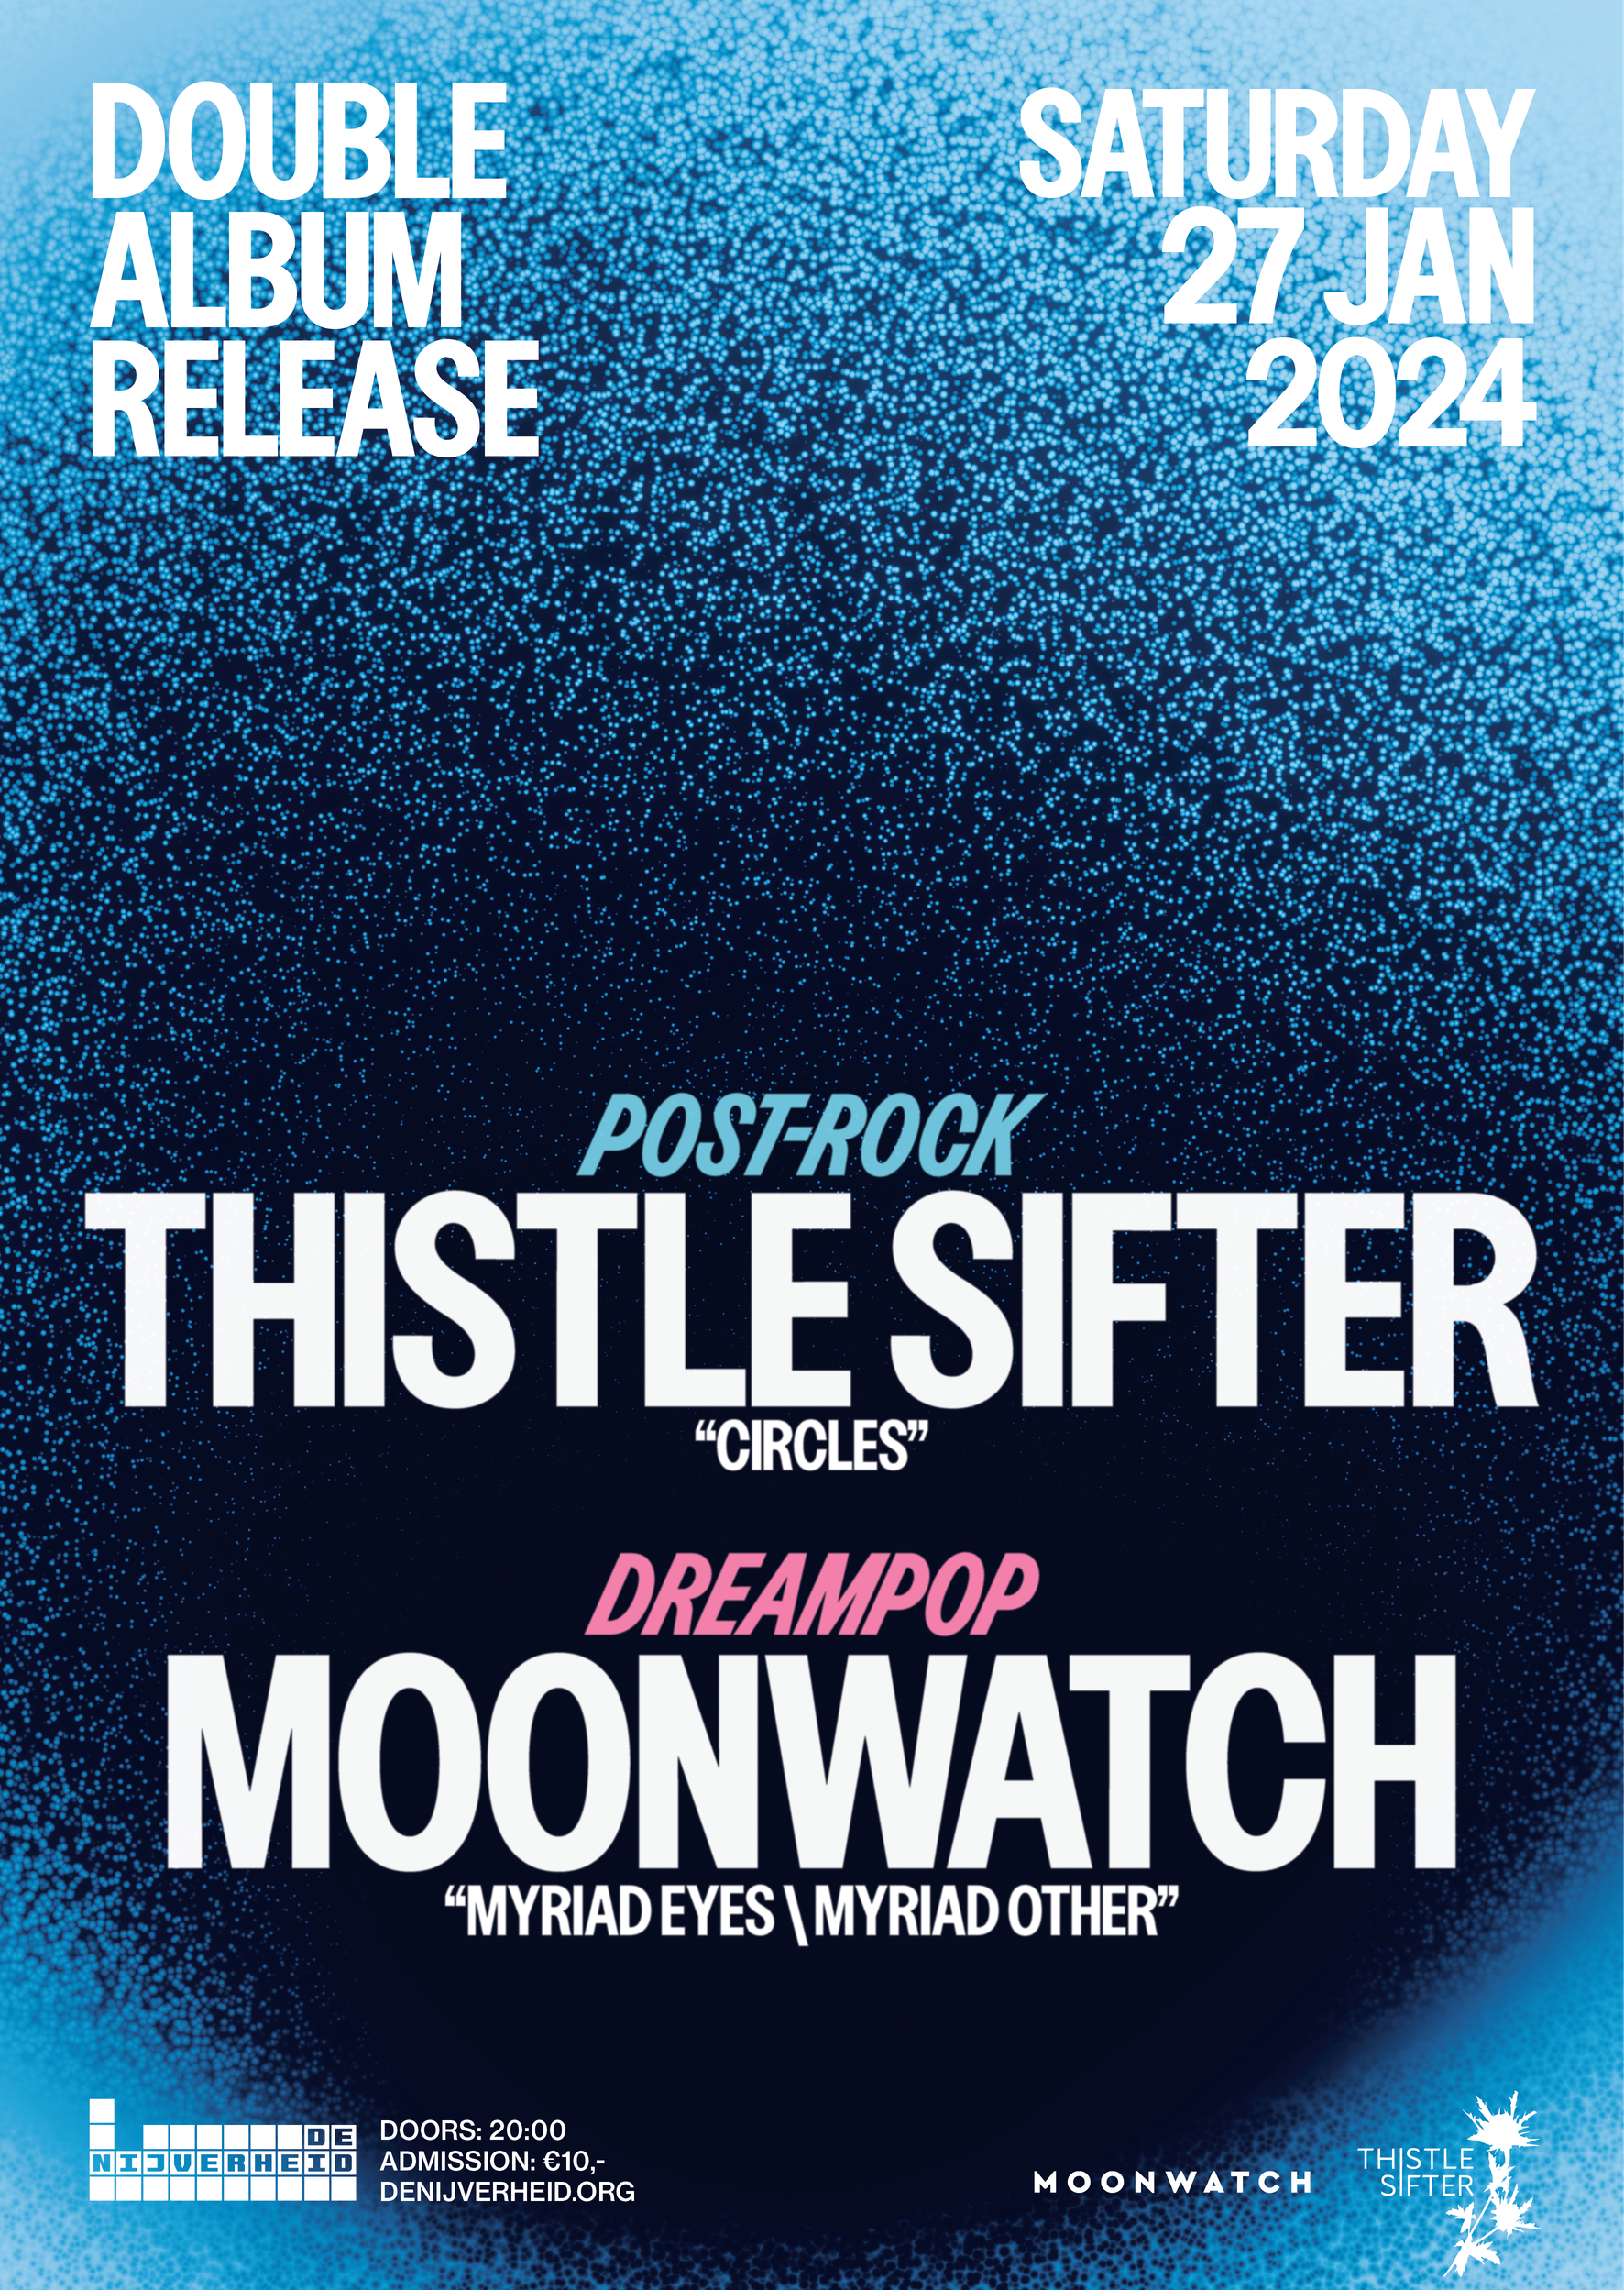 Concert poster for Moonwatch and Thistle Sifter double album release show